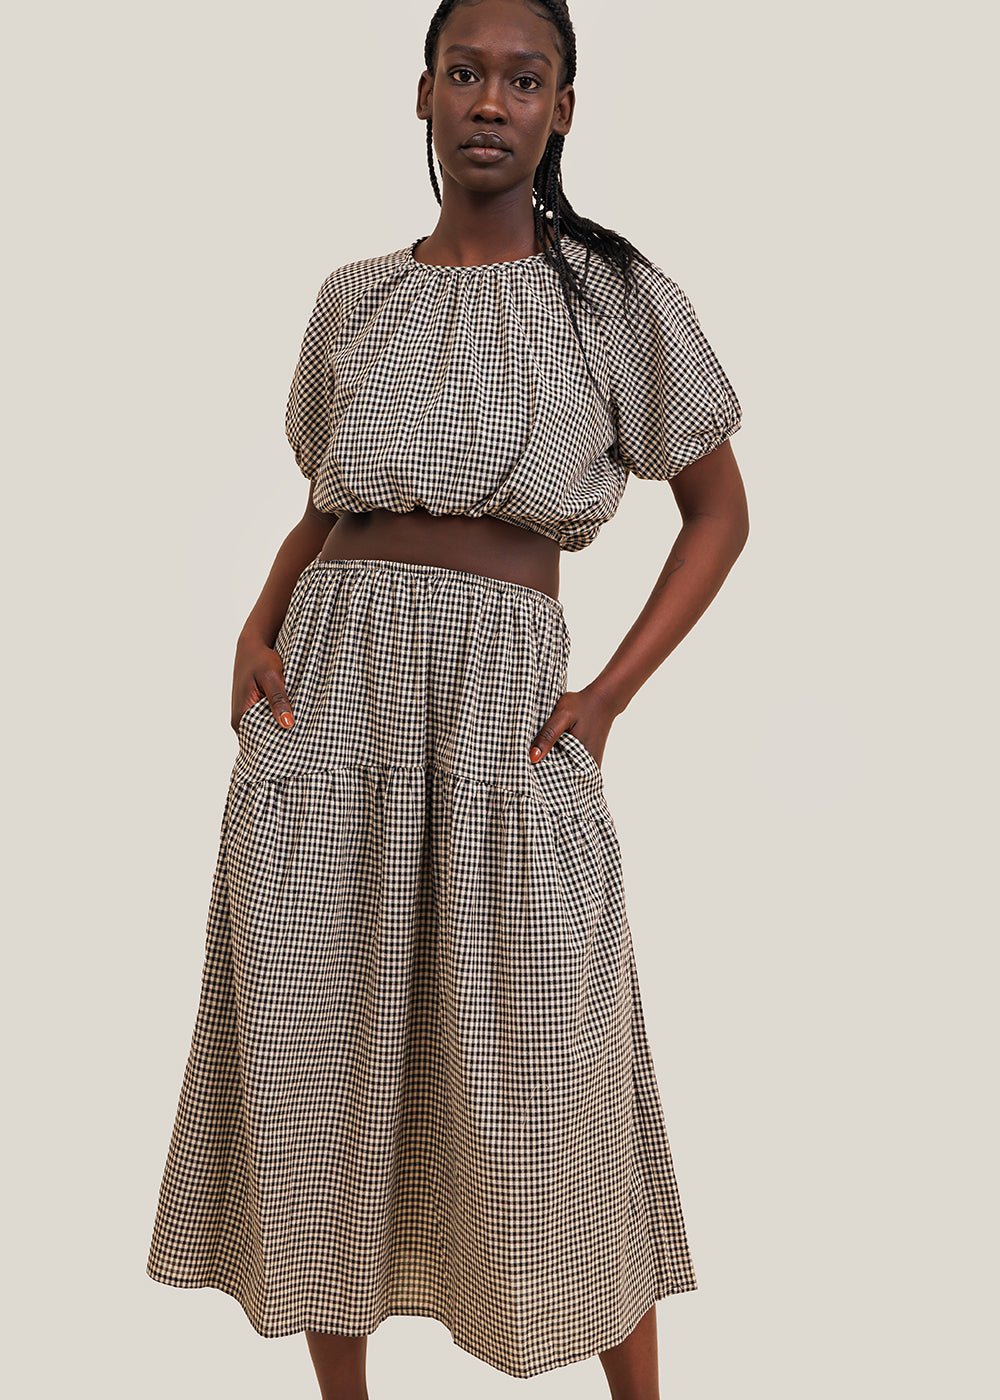 Bronze Age Dani Gingham Field Skirt - New Classics Studios Sustainable Ethical Fashion Canada